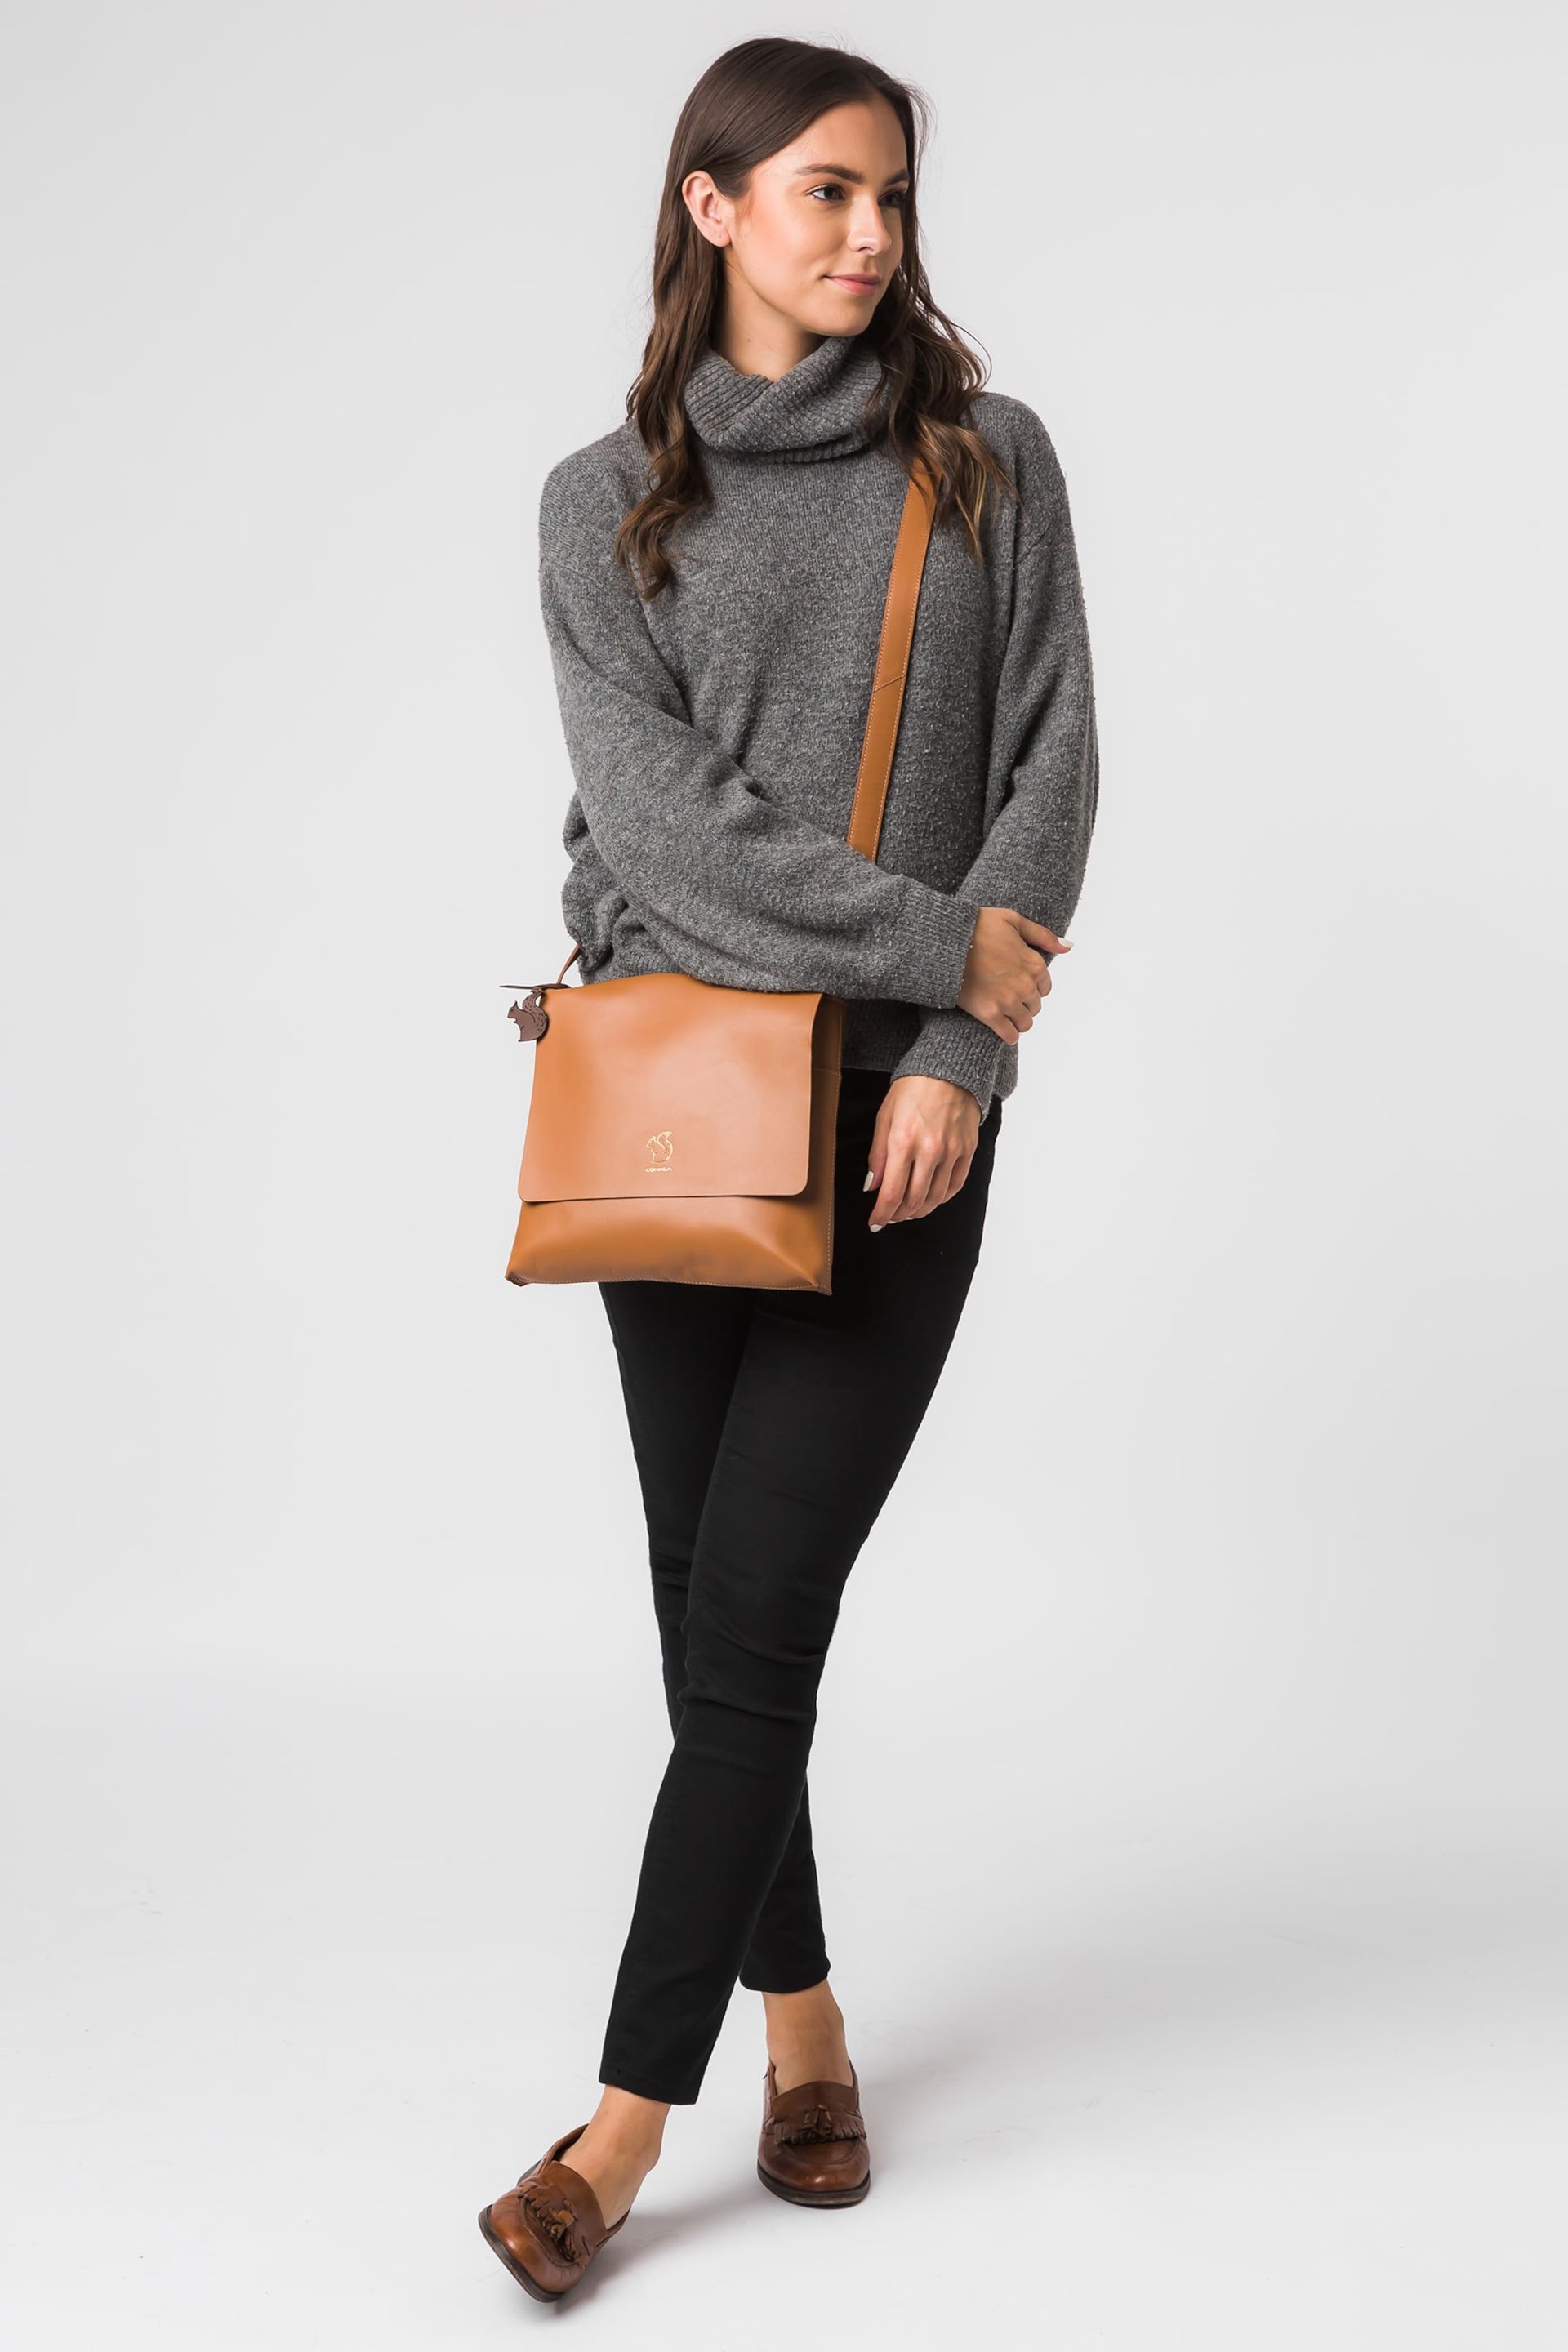 Conkca Bale Vegetable-Tanned Leather Cross-Body Bag - Image 1 of 5